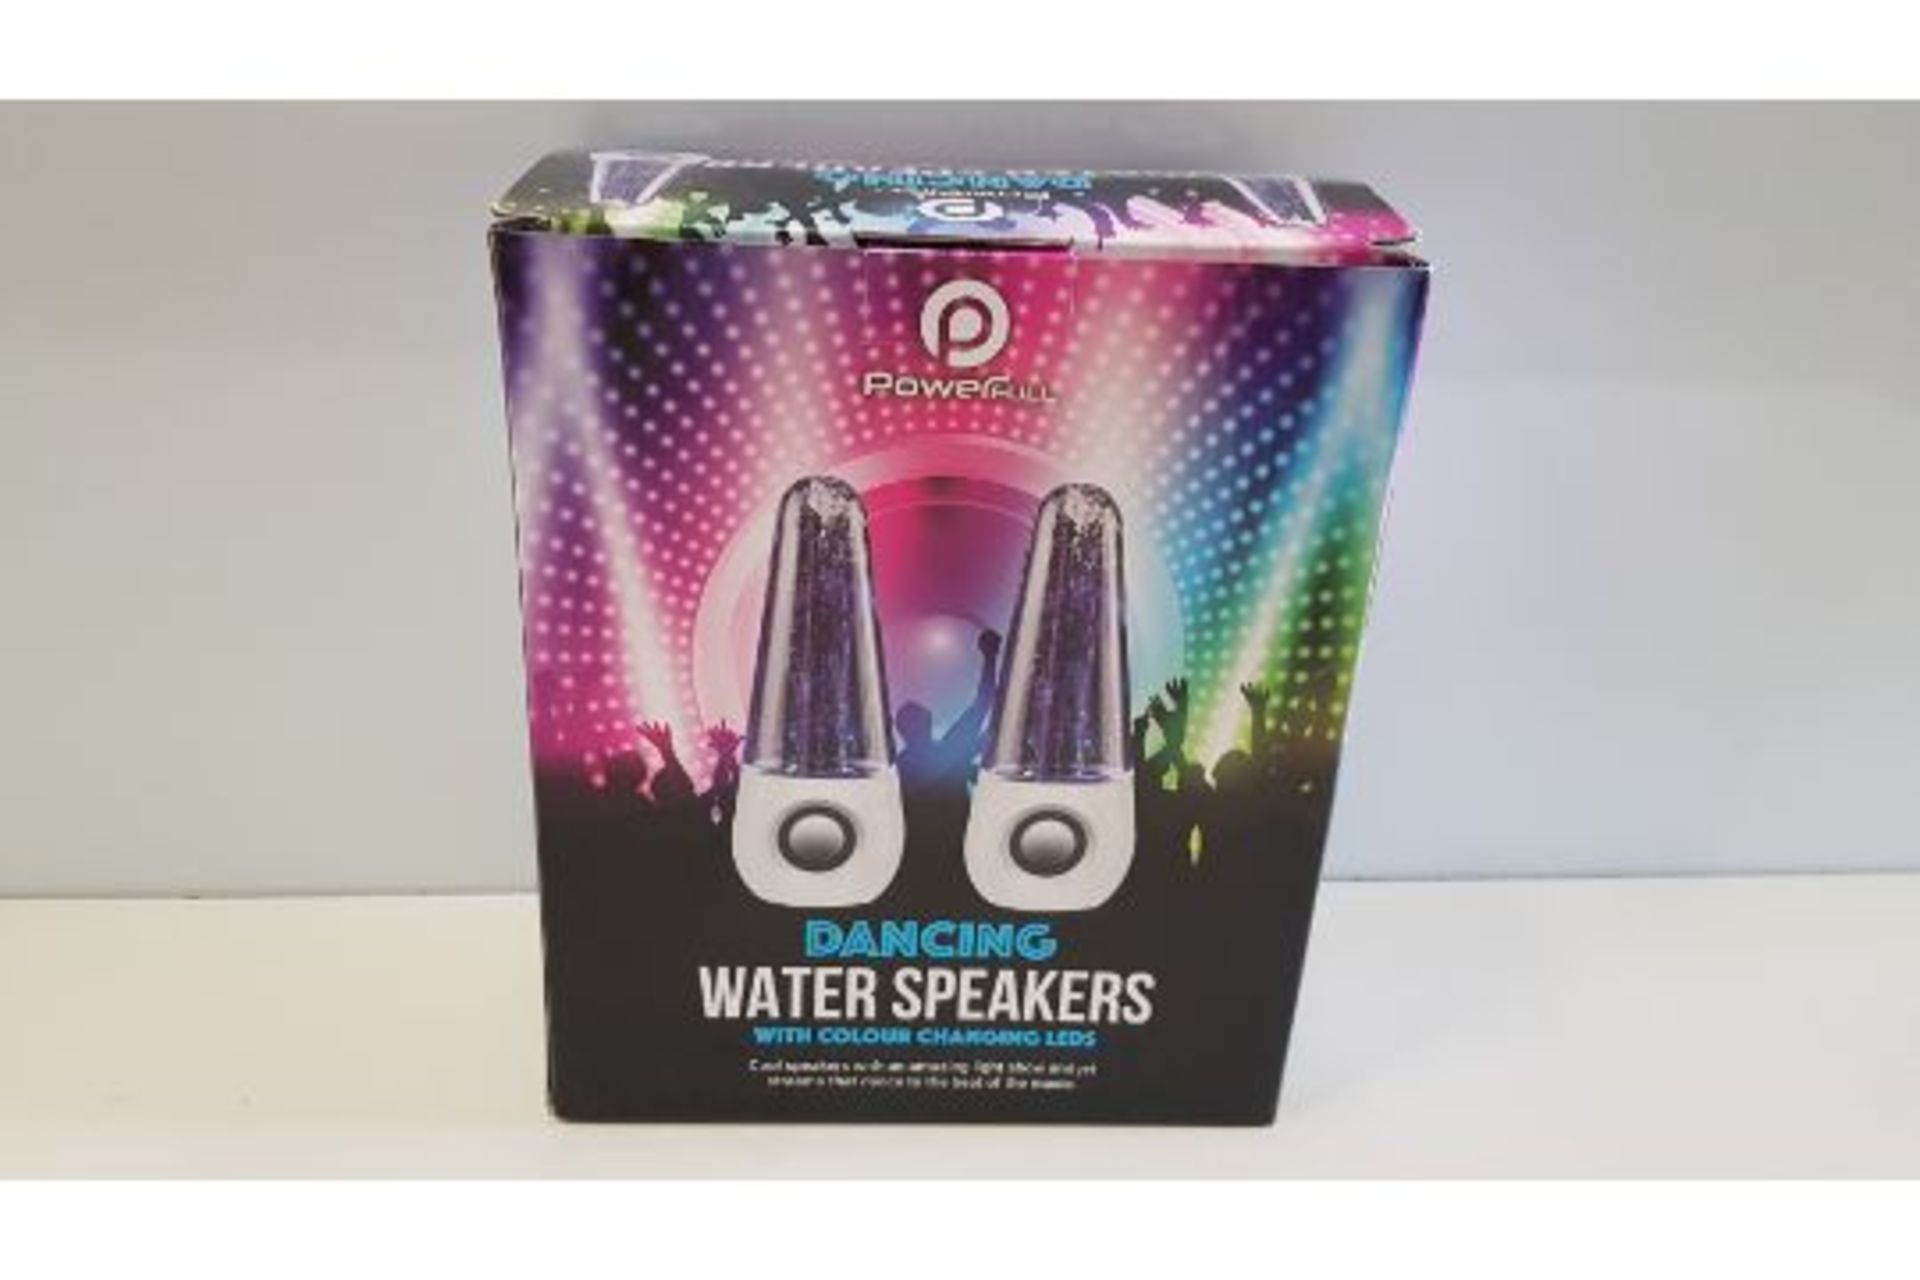 4 X NEW BOXED POWERFULL DANCING LED WATER SPEAKERS WITH COLOUR CHANGING LIGHTS (ROW10/11/16)